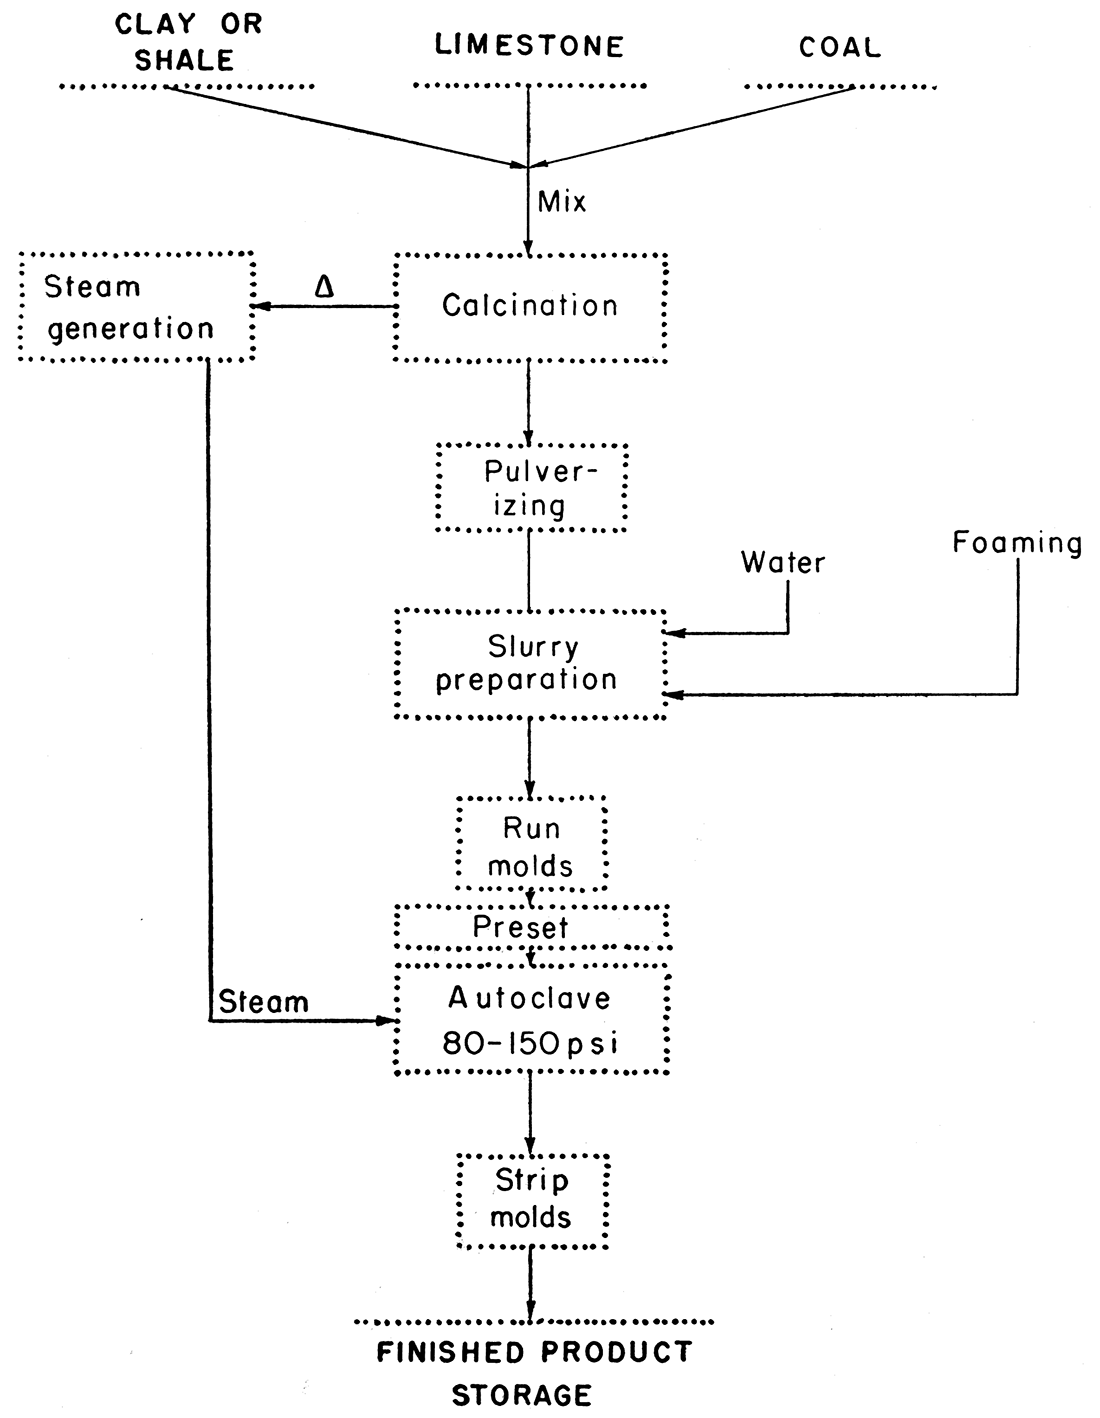 Diagram illustrating the steps necessary to produce cellulated shapes from raw materials.